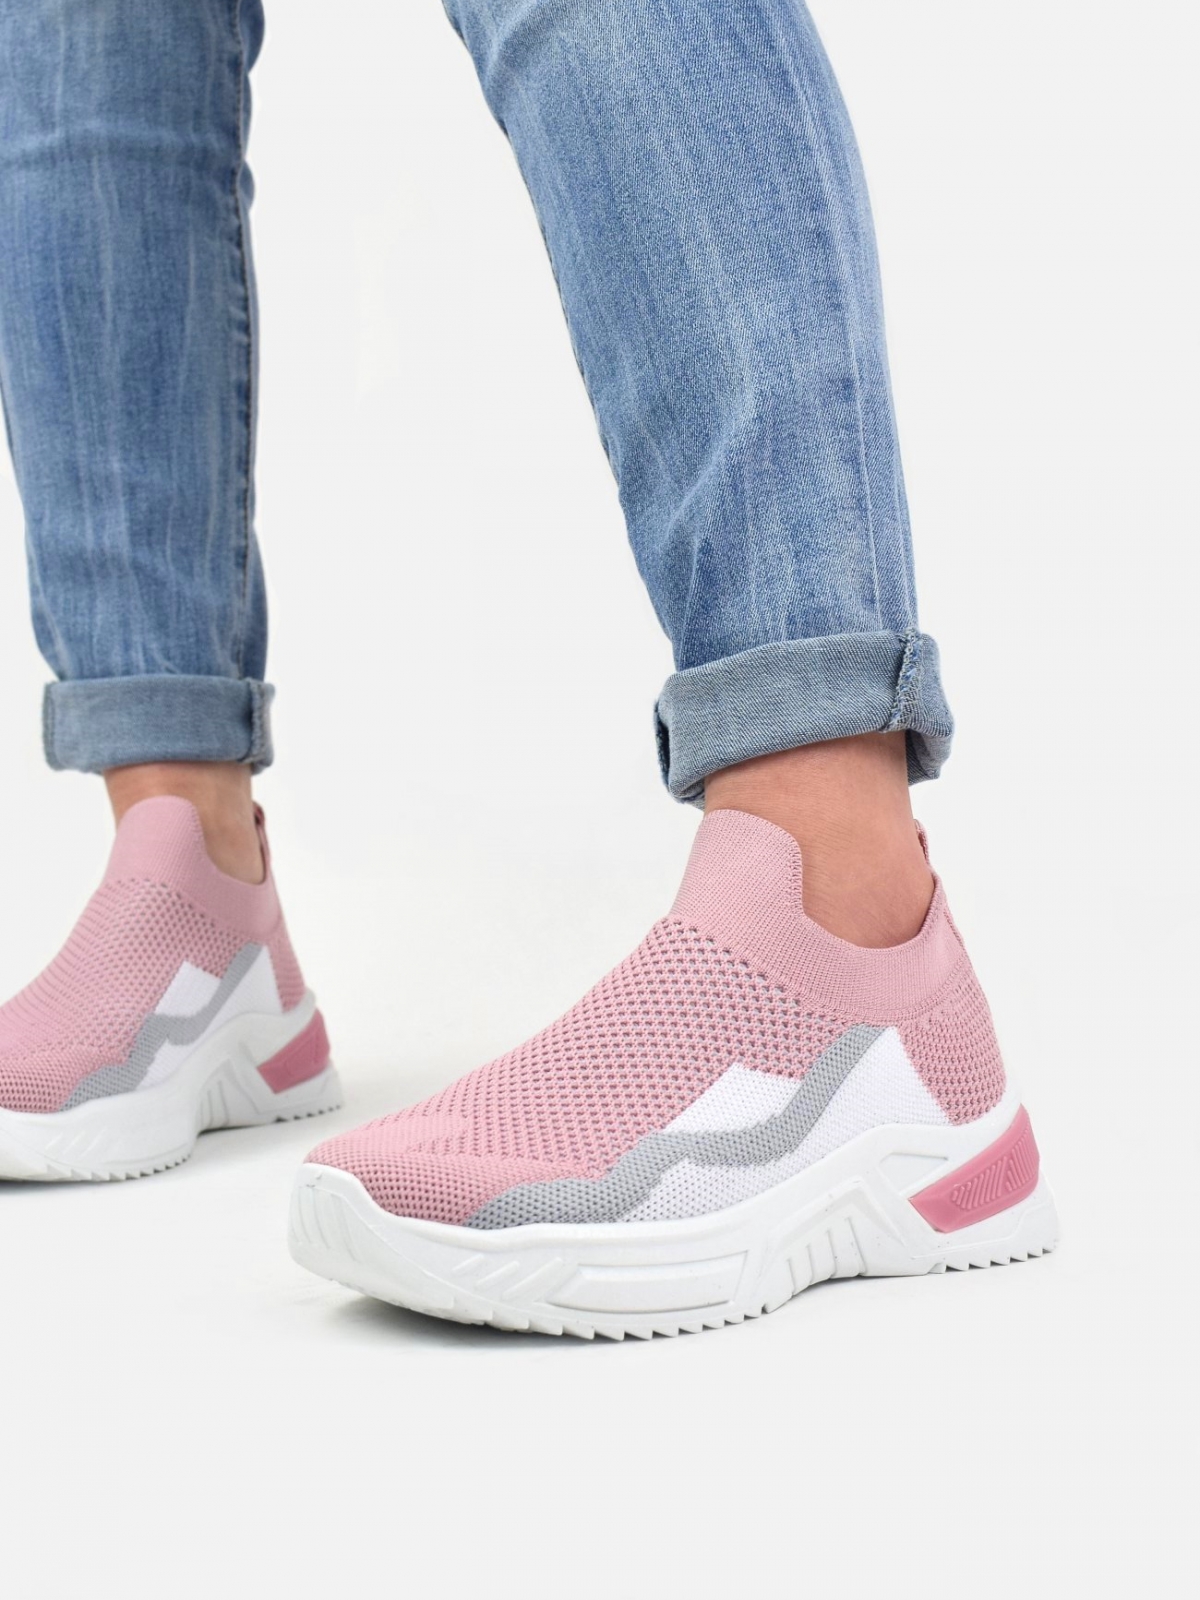 Stylish sock type trainers in pink